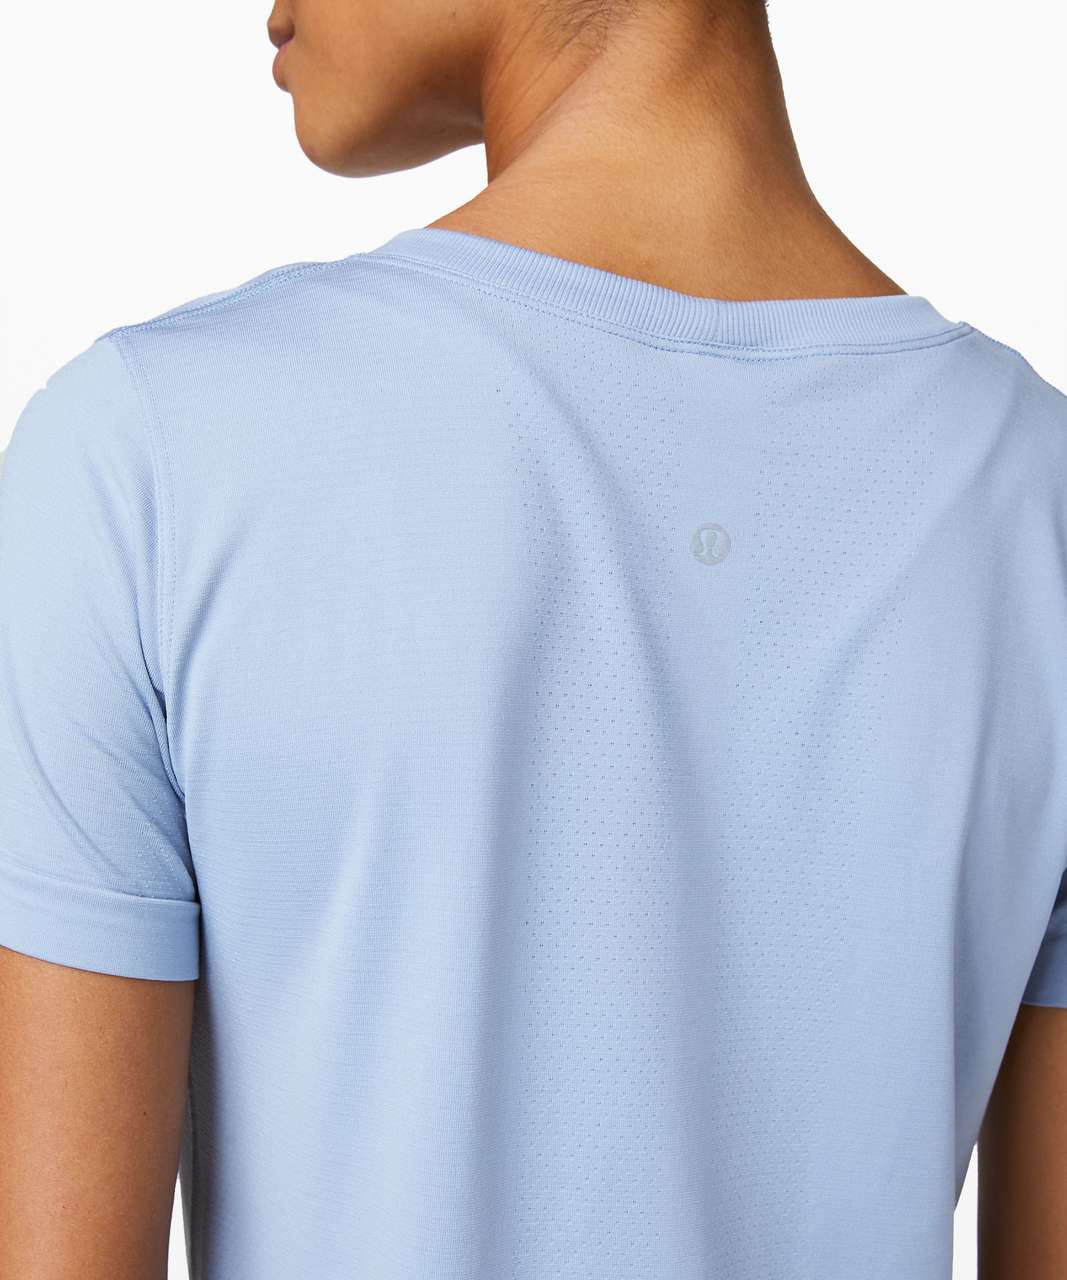 Lululemon Swiftly Tech Short Sleeve (Breeze) *Relaxed Fit - Ice Cap / Ice Cap